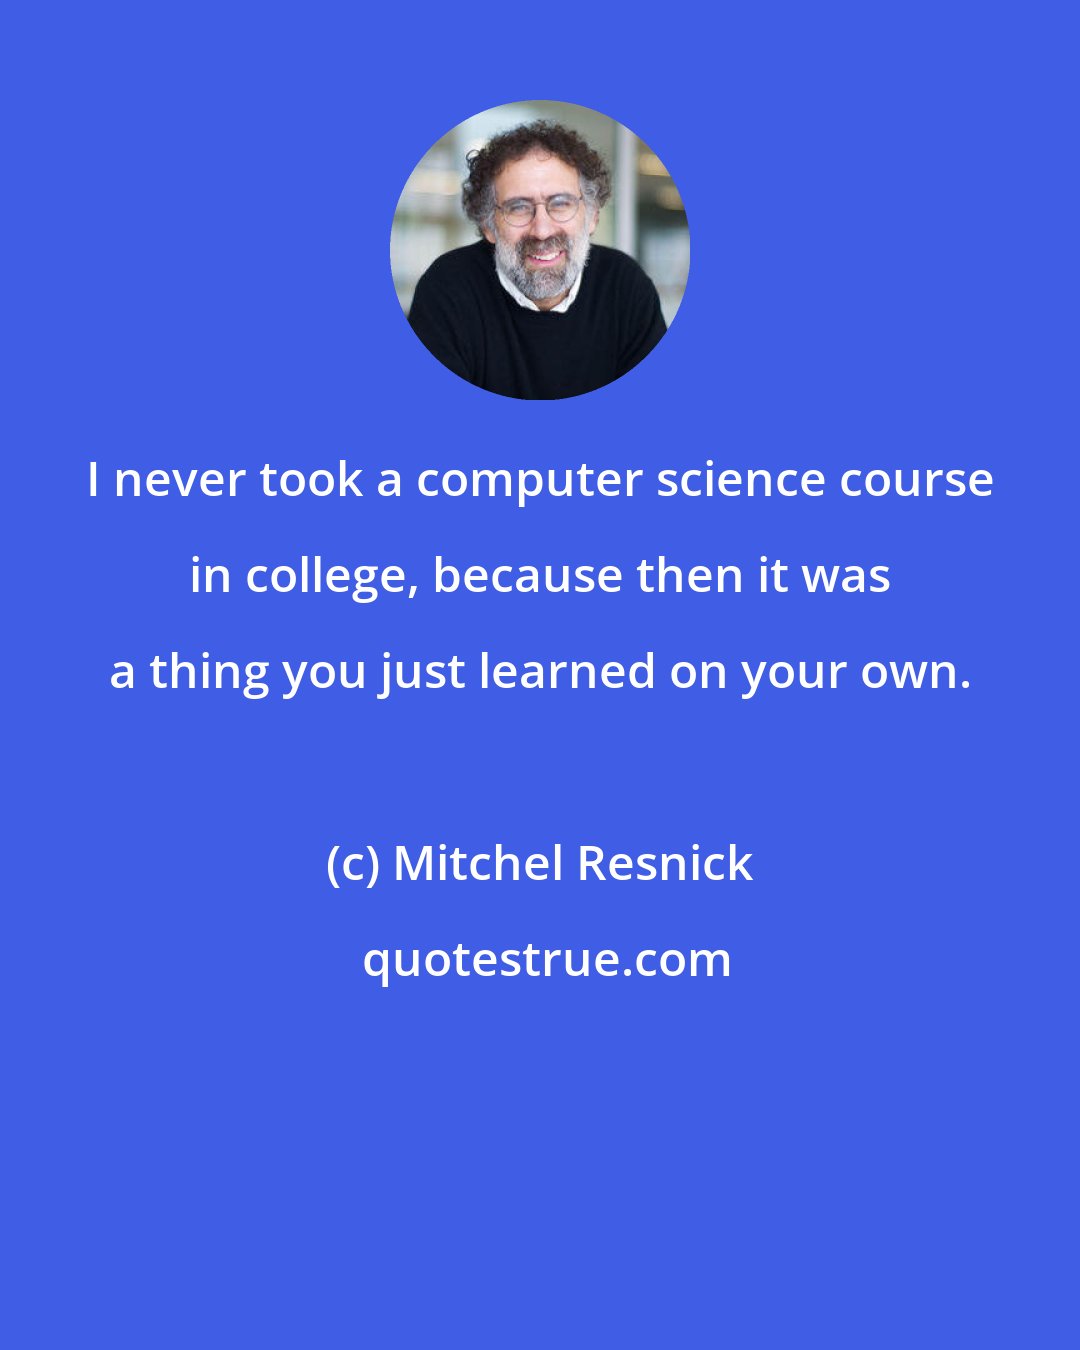 Mitchel Resnick: I never took a computer science course in college, because then it was a thing you just learned on your own.